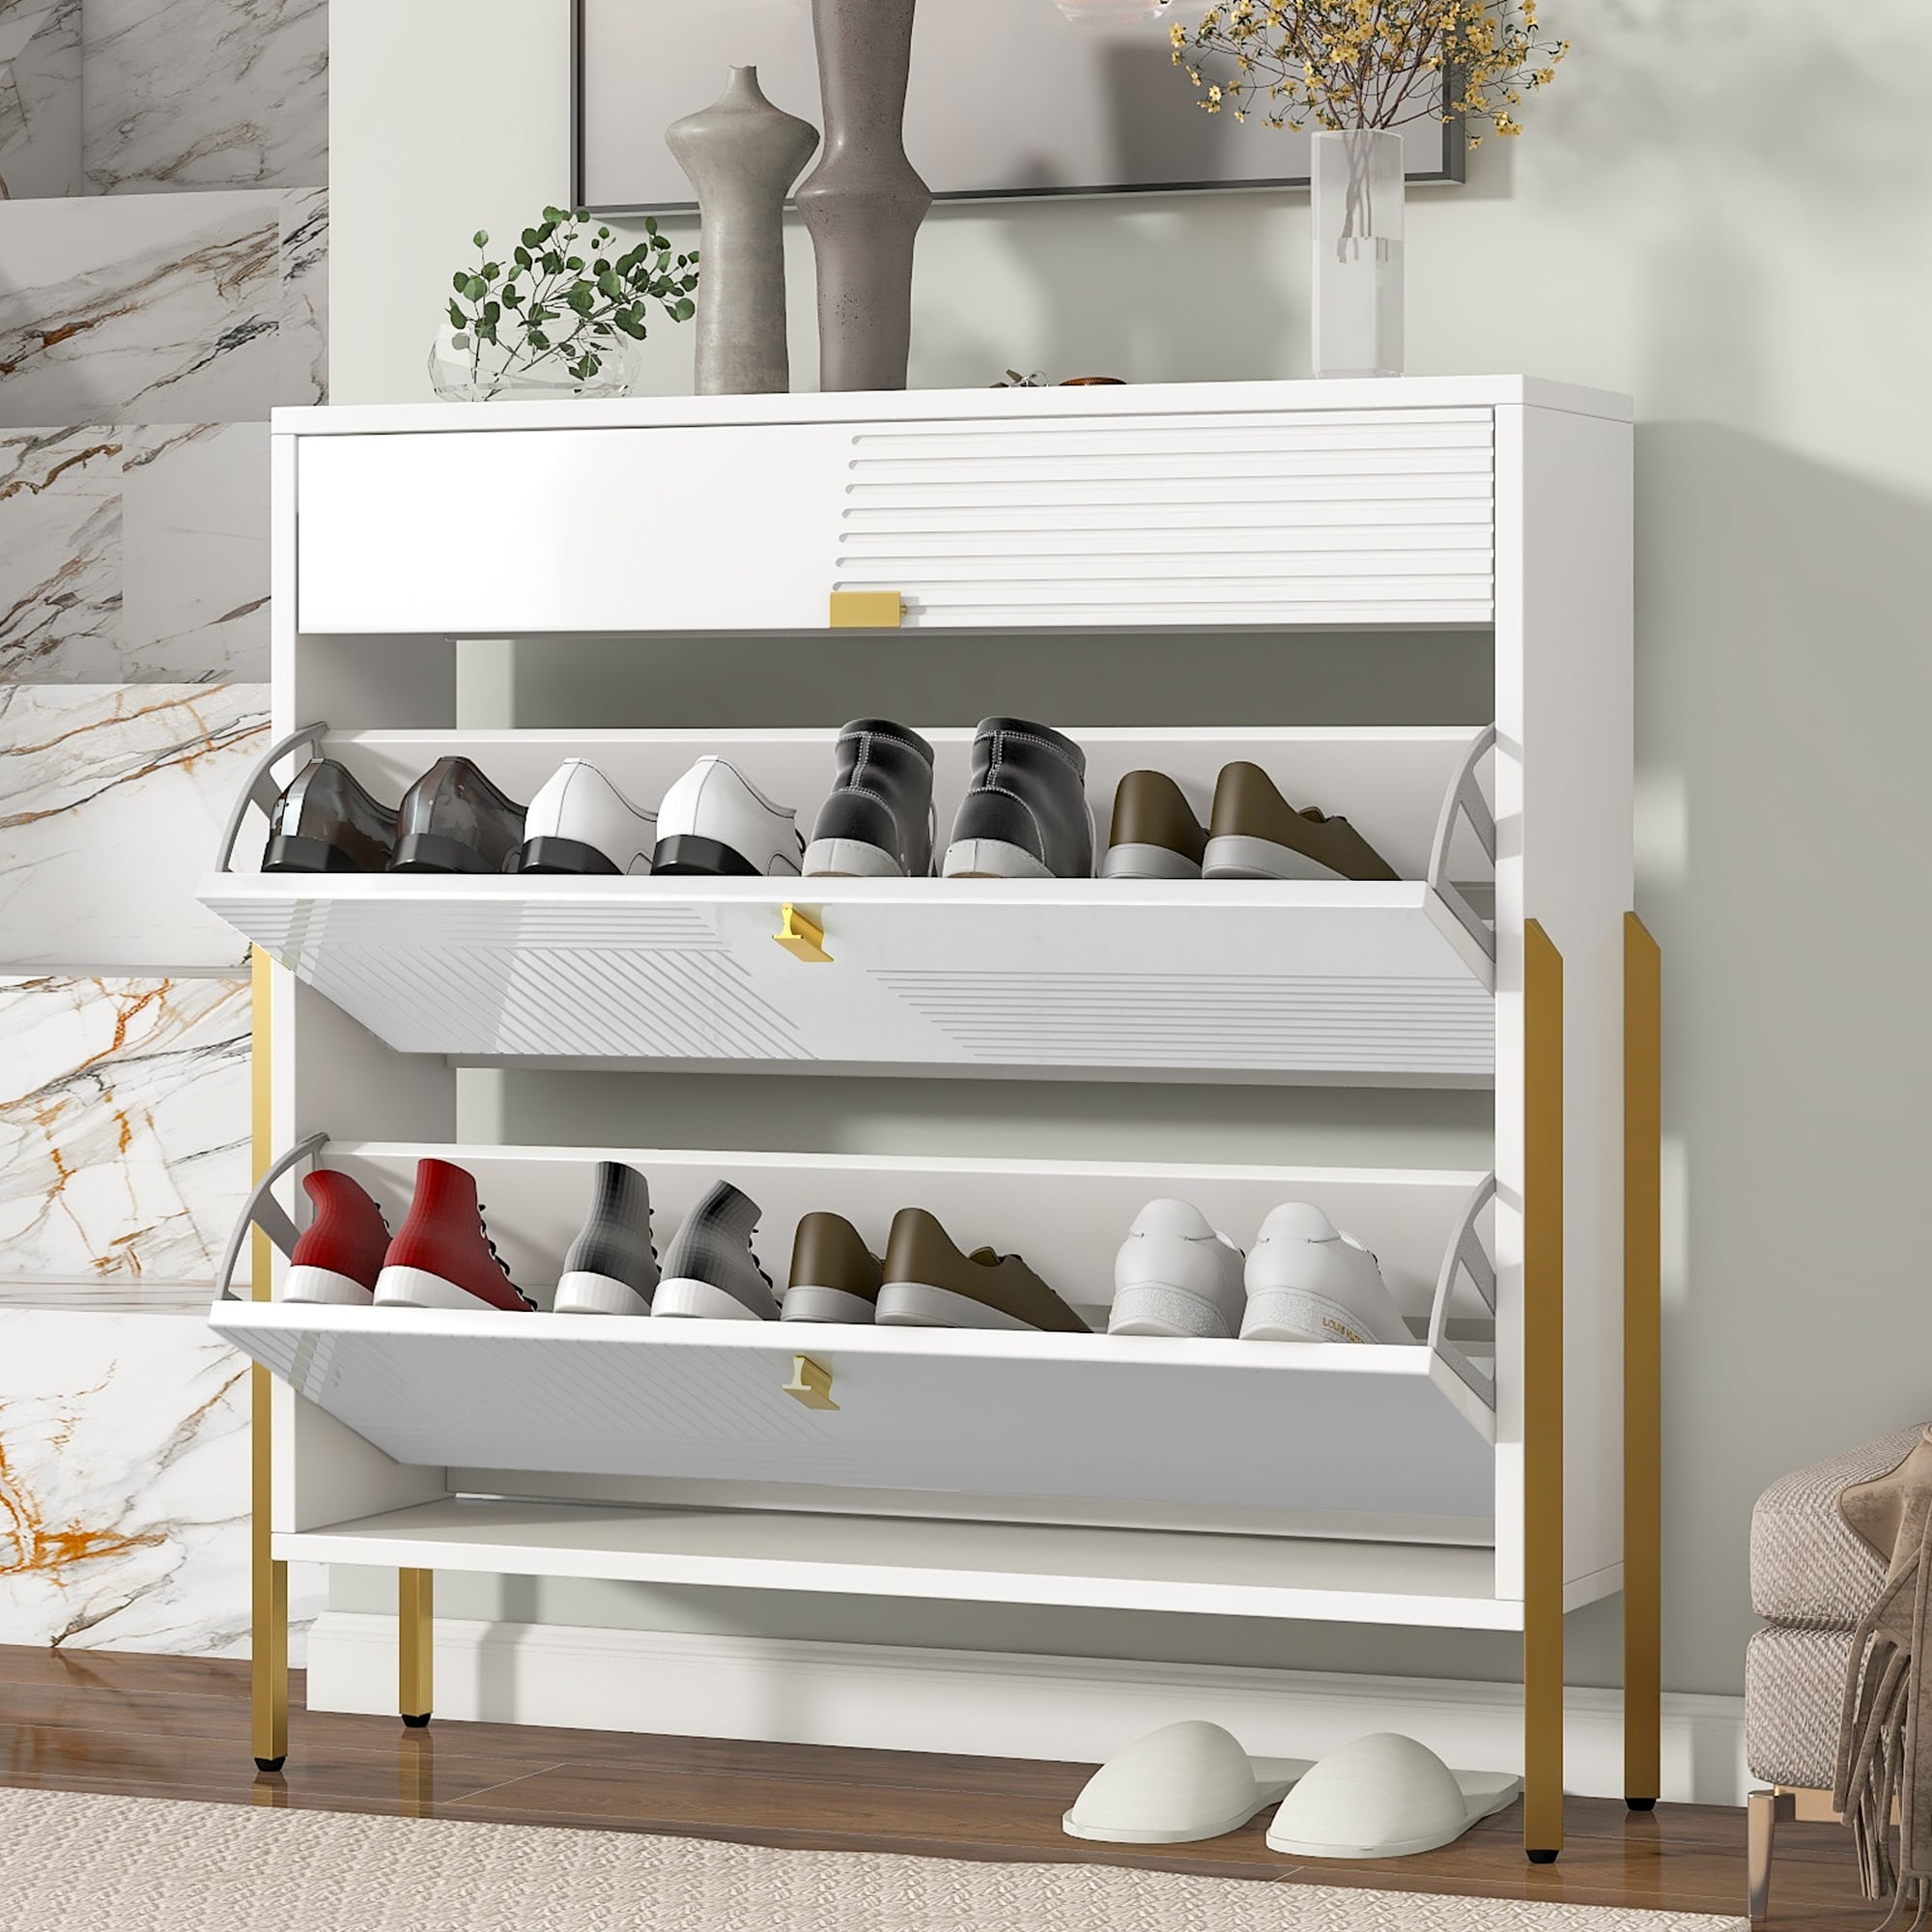 20 Best Shoe Organizers: Shoe Racks, Shelves, and More | Architectural  Digest